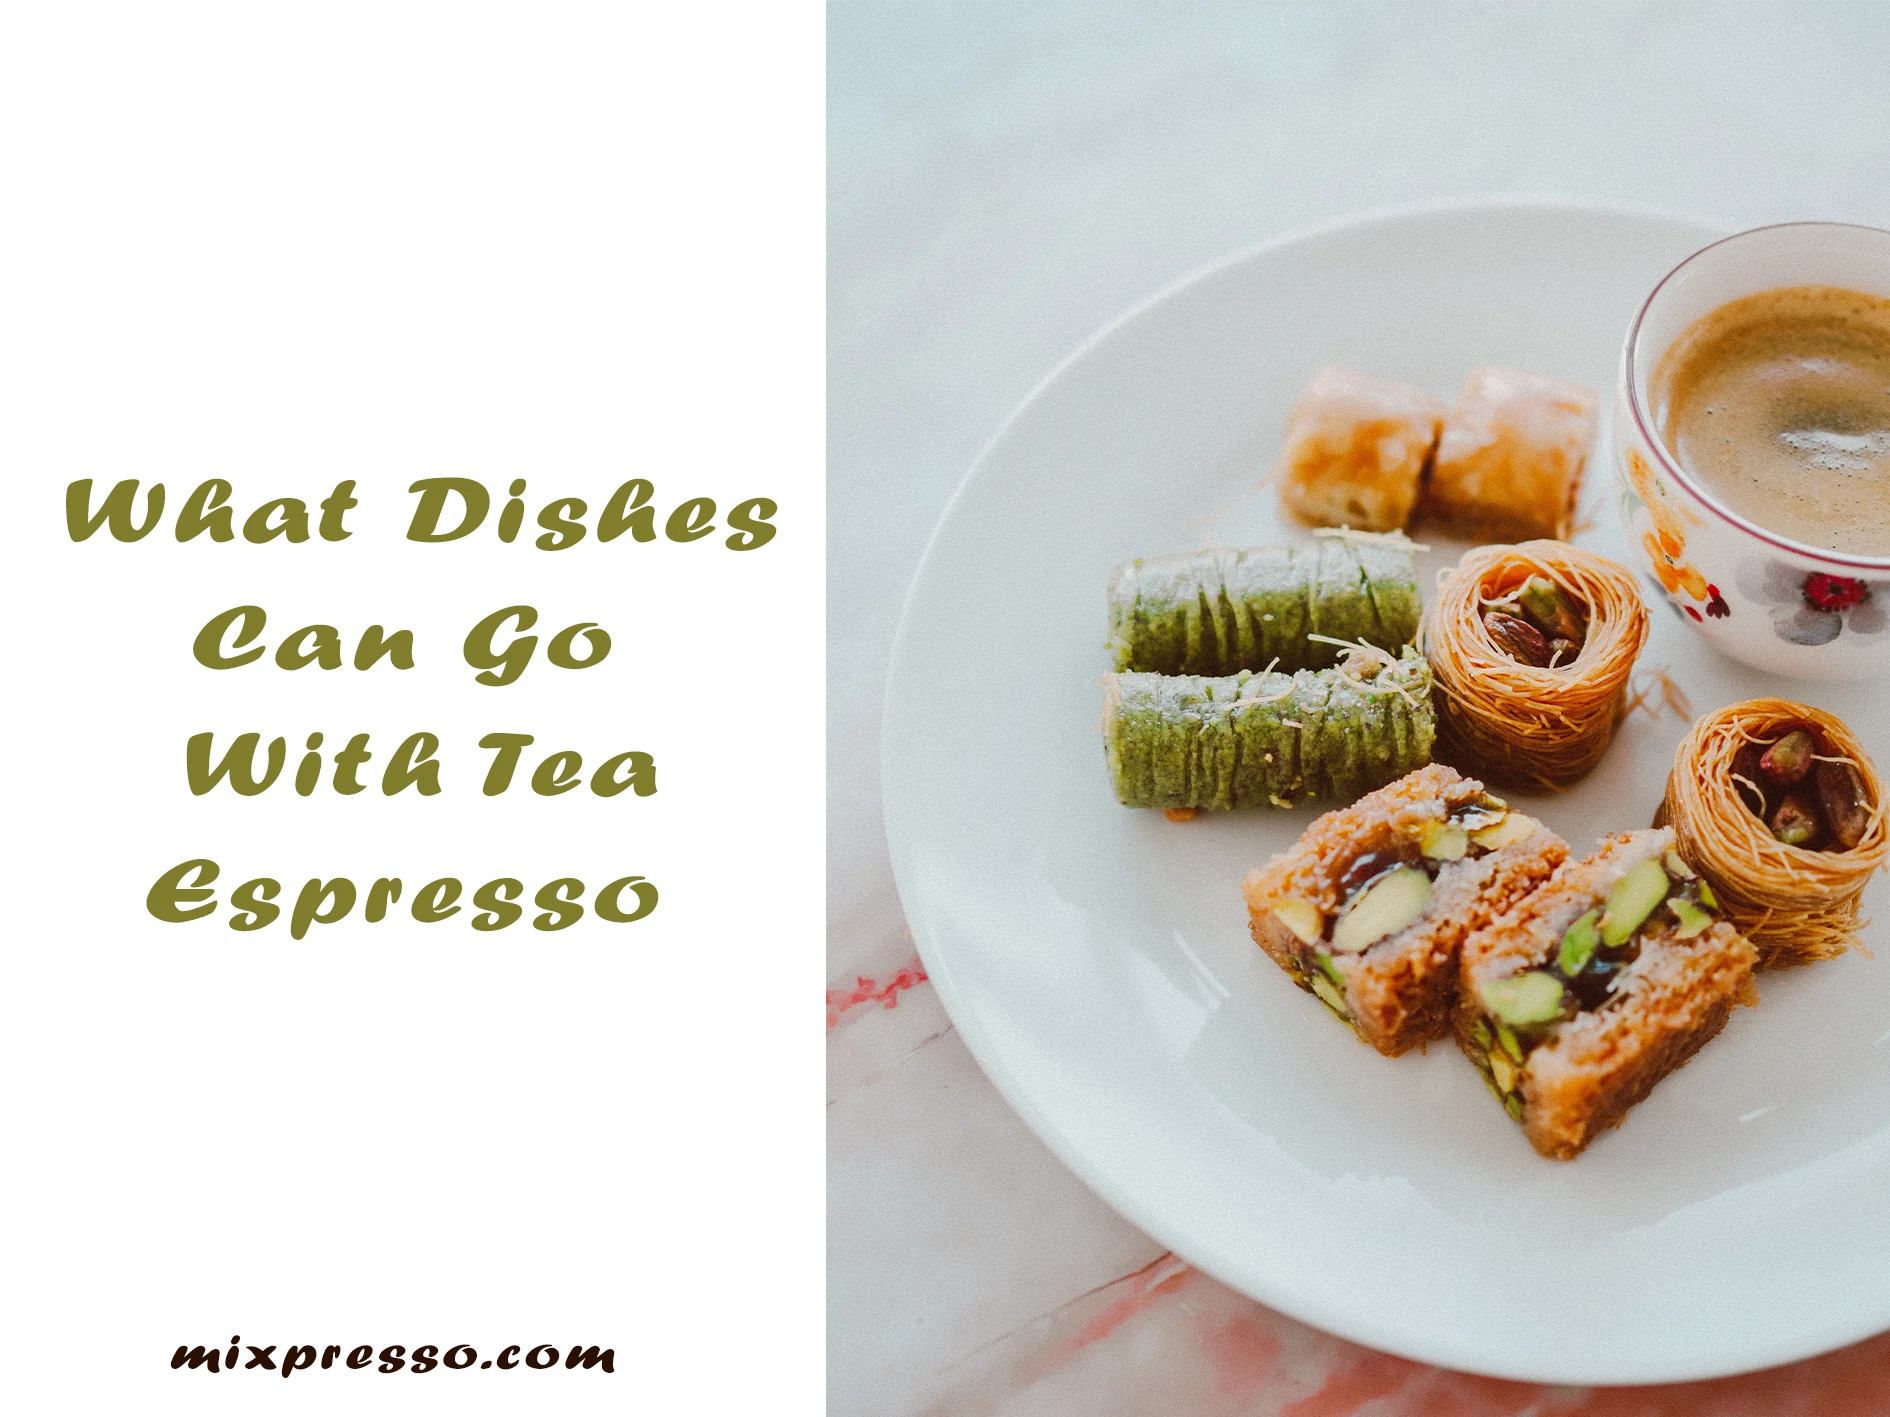 What dishes can go with tea espresso